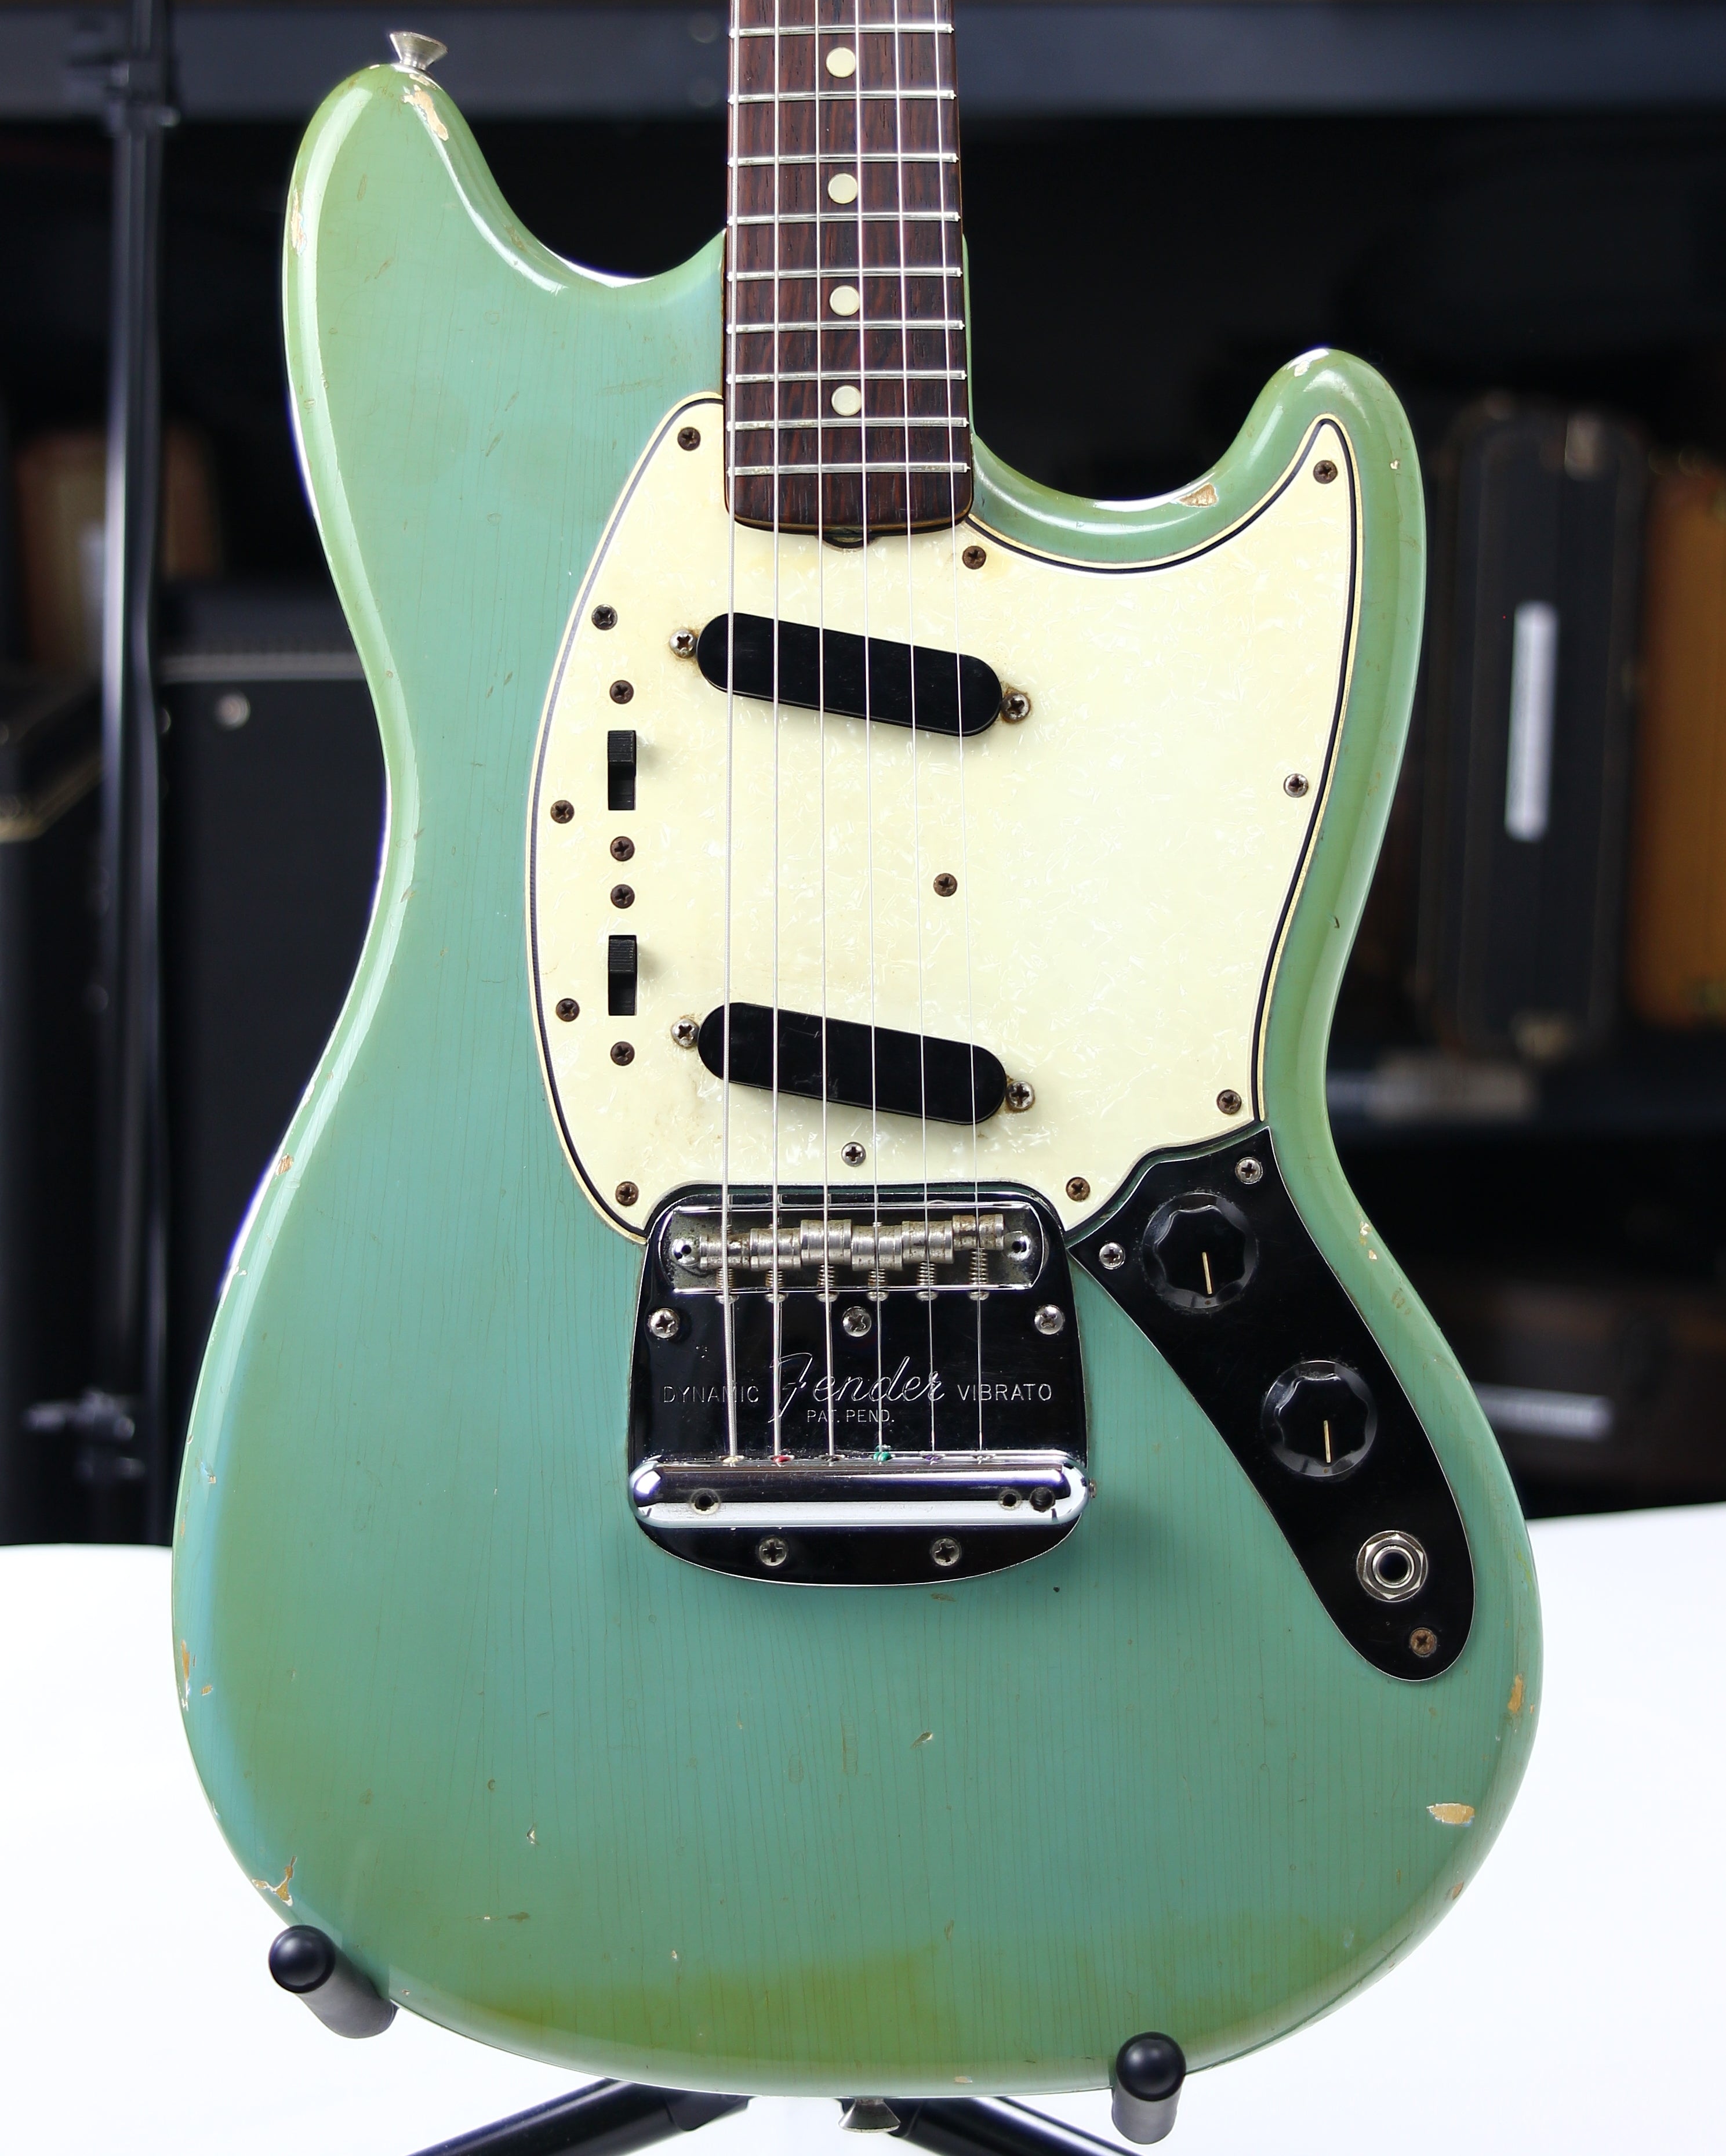 *SOLD*  1965 Fender Mustang DAPHNE BLUE - Kurt Cobain-type, L-Series, Small Headstock! duo sonic musicmaster